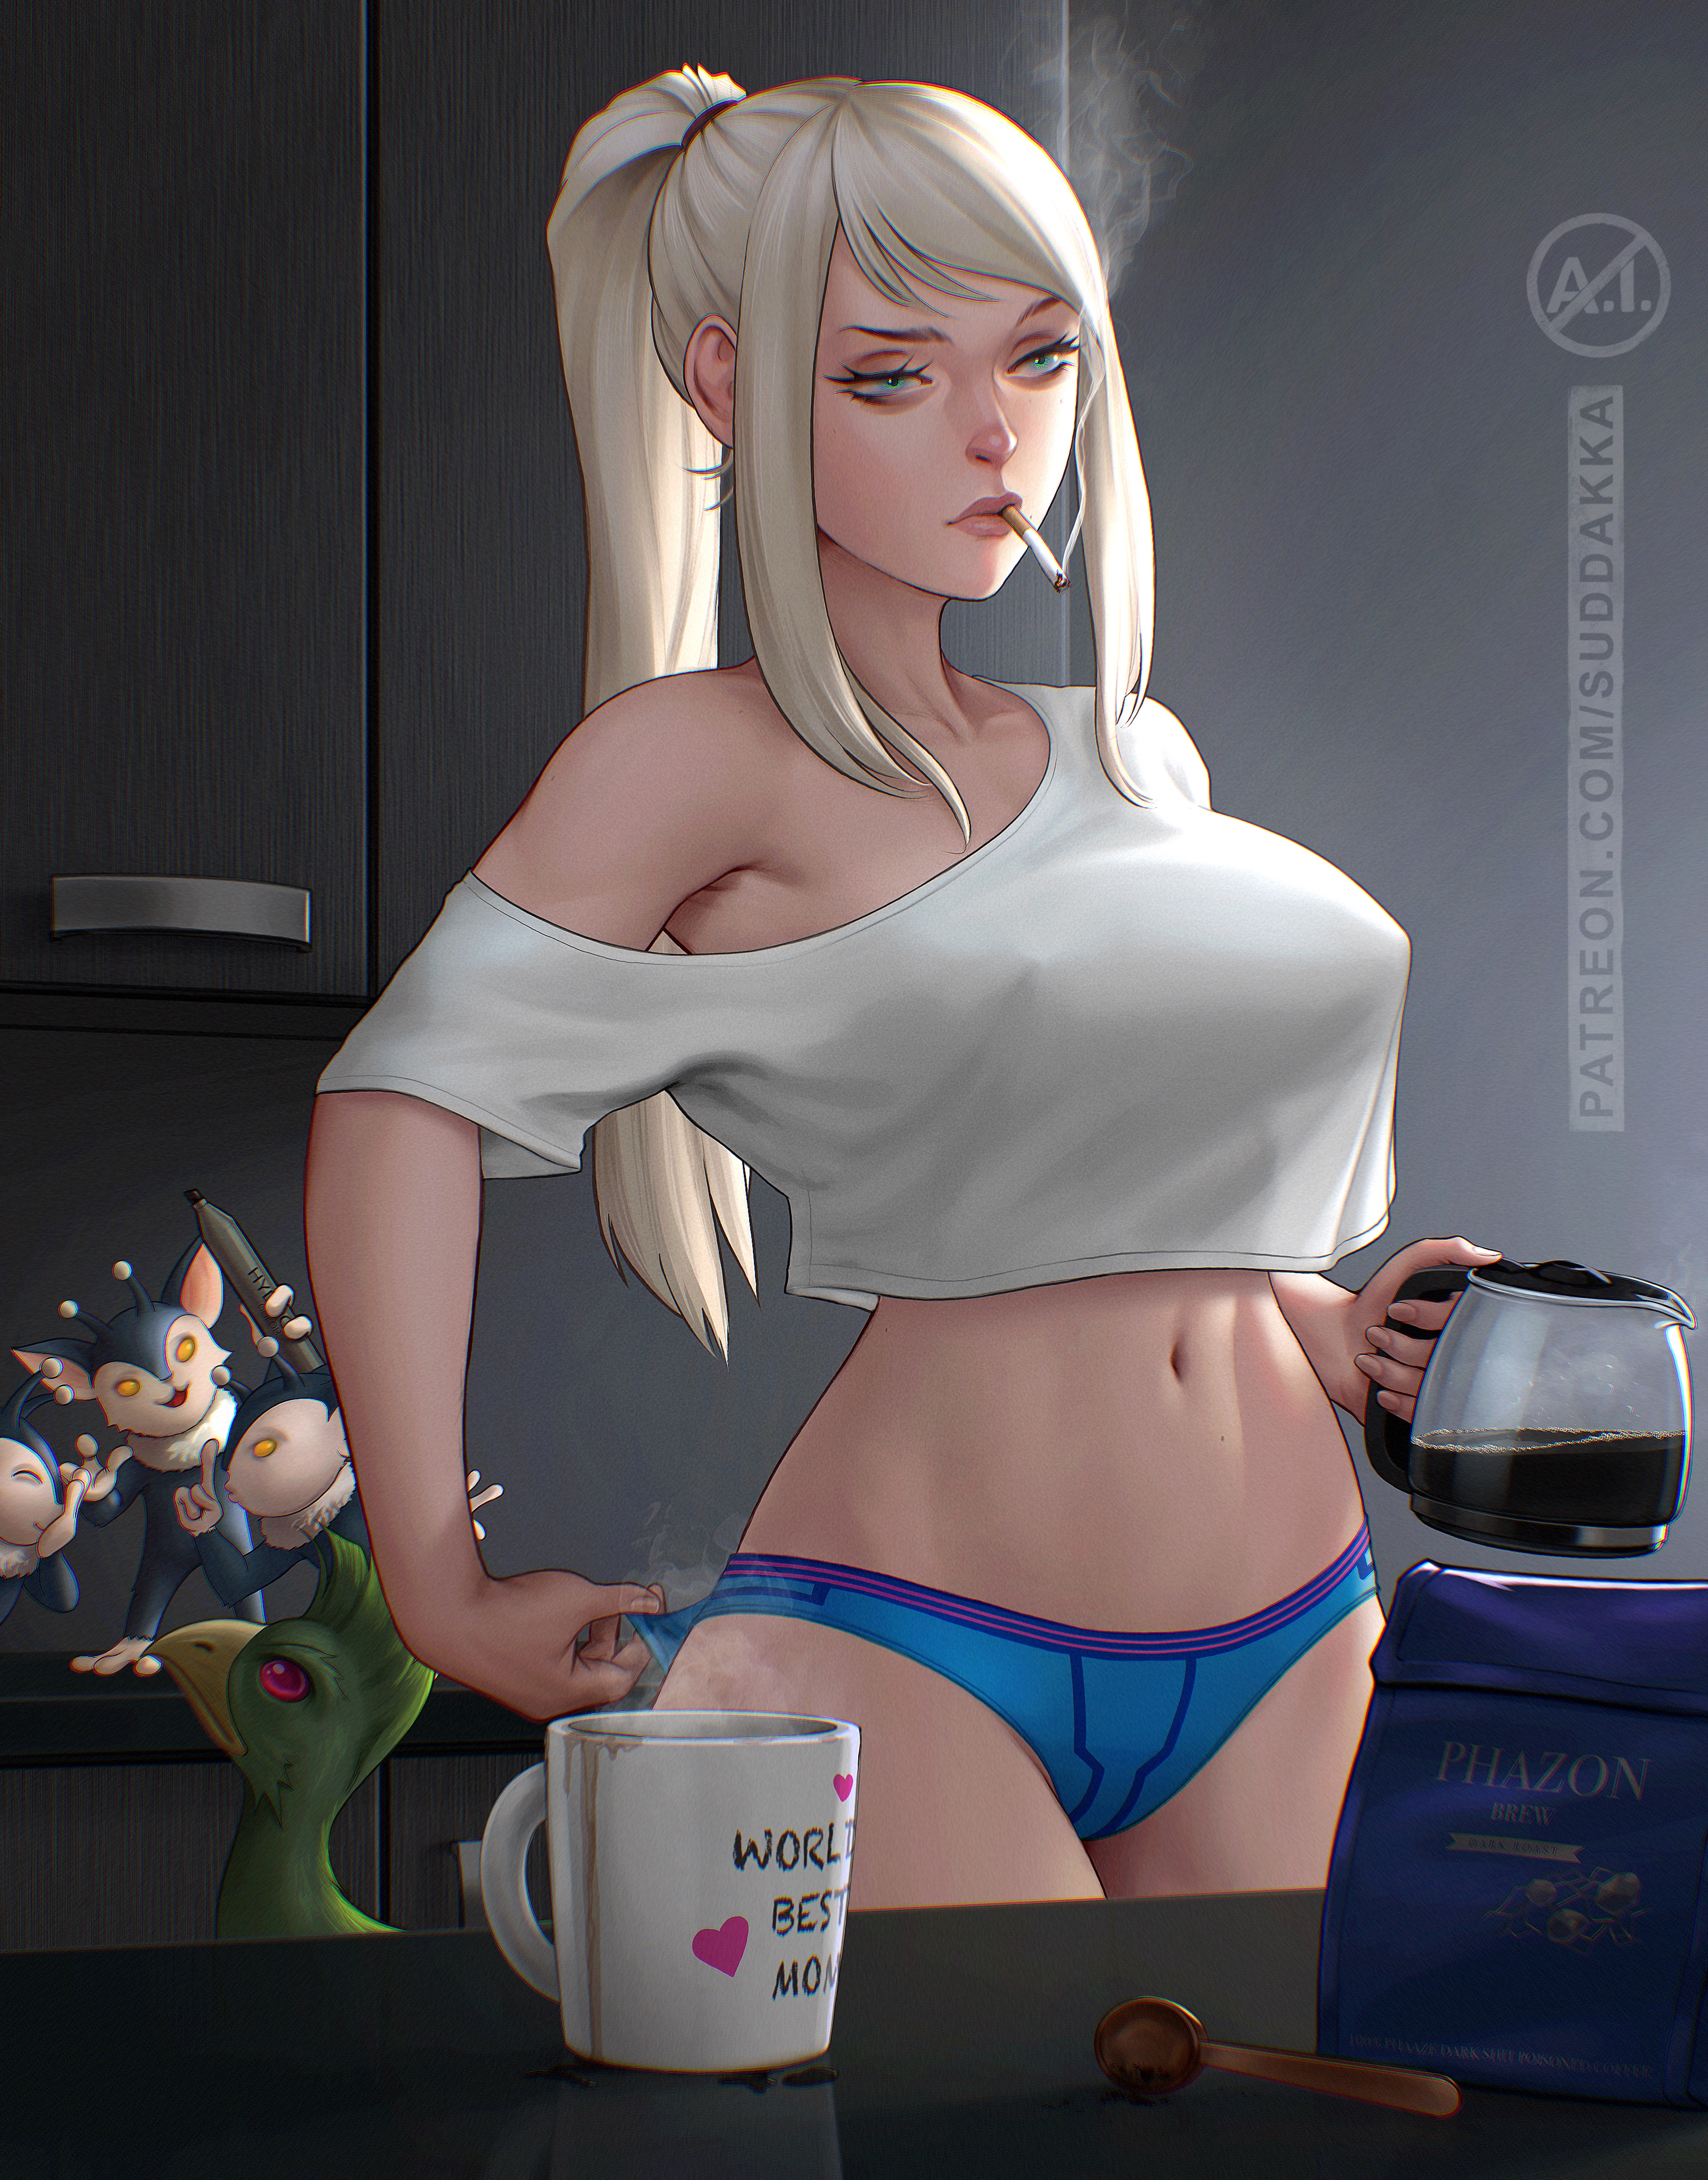 General 3210x4096 blue panties Suddakka Metroid Samus Aran coffee women indoors moles cigarettes kitchen partially clothed blue eyes blonde ponytail thighs together no bra watermarked looking away frontal view closed mouth belly button belly shaved armpit smoking outline video game girls video game characters